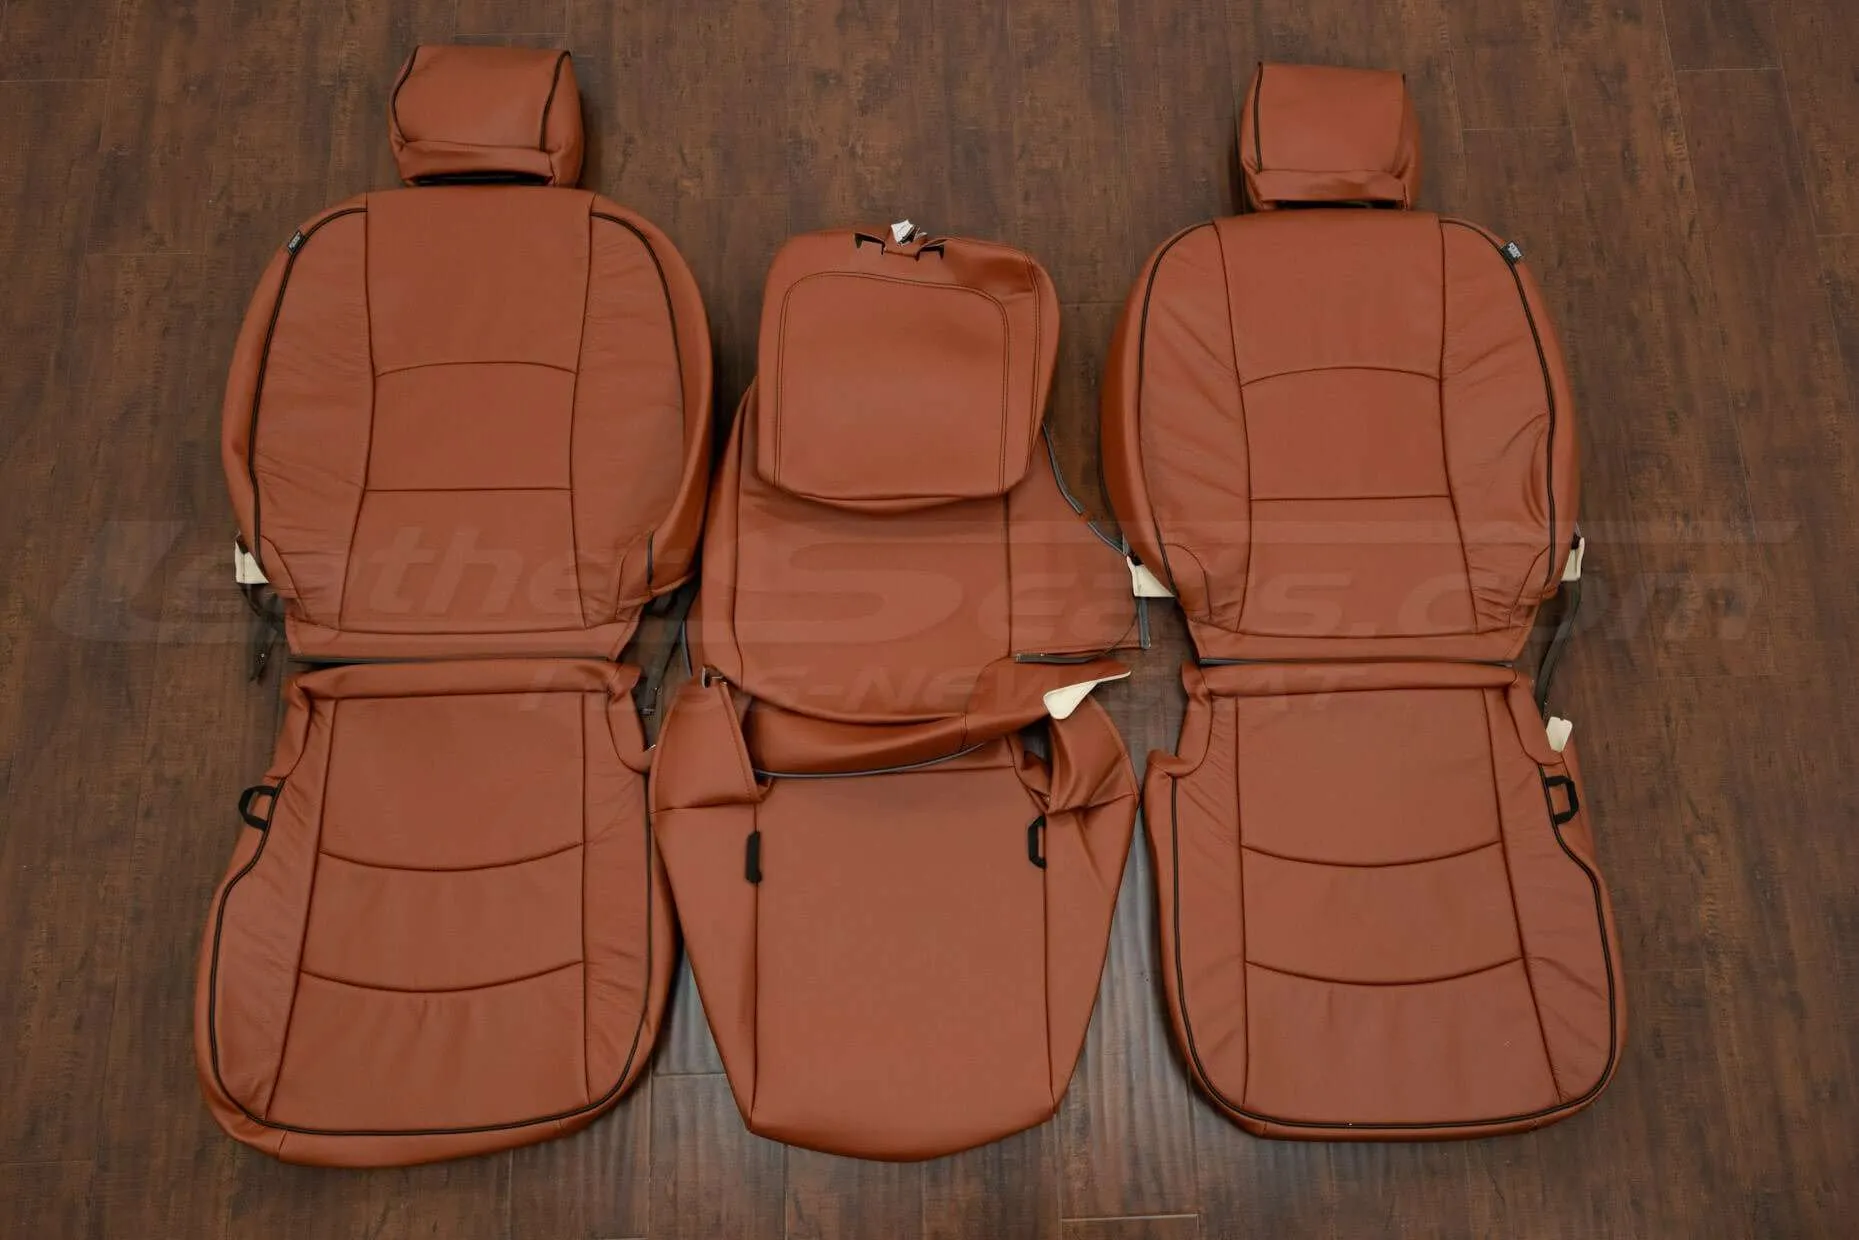 2015 Dodge Ram Crew Cab Leather Seat Upholstery Kit - Mitt Brown - Front seat upholstery in 40/20/40 seat configuration